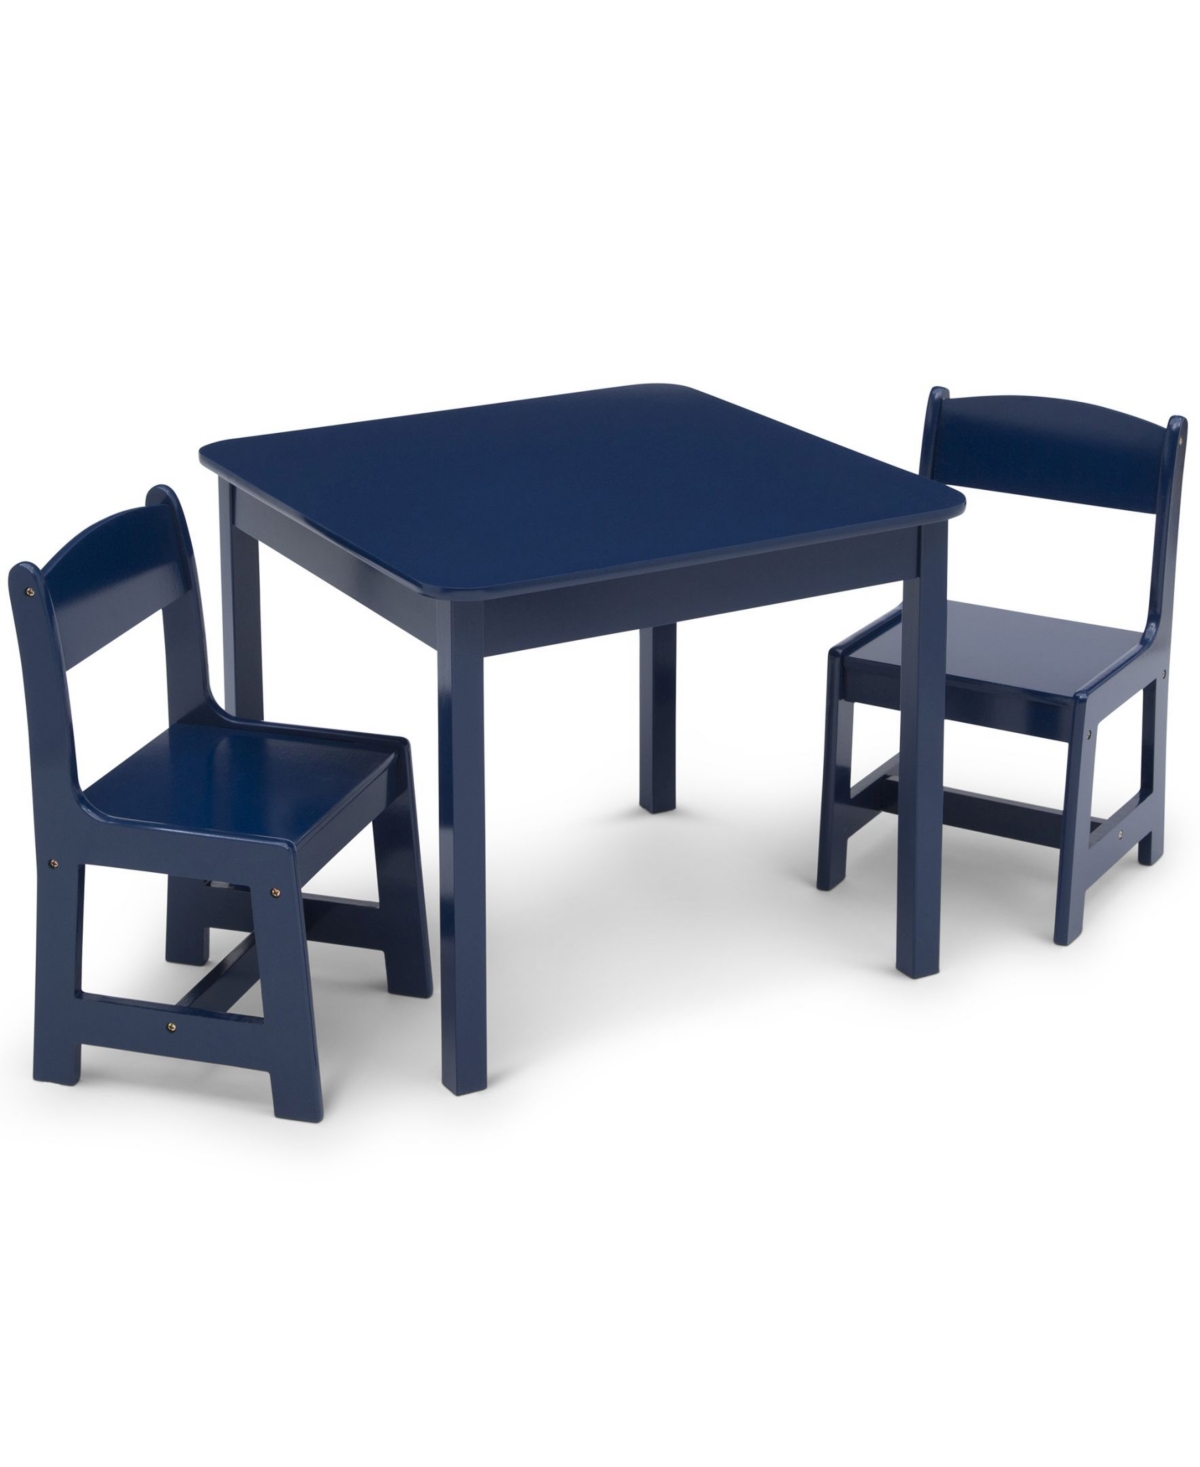 Delta Children Mysize Wood Table and Chairs Set, 3 Piece